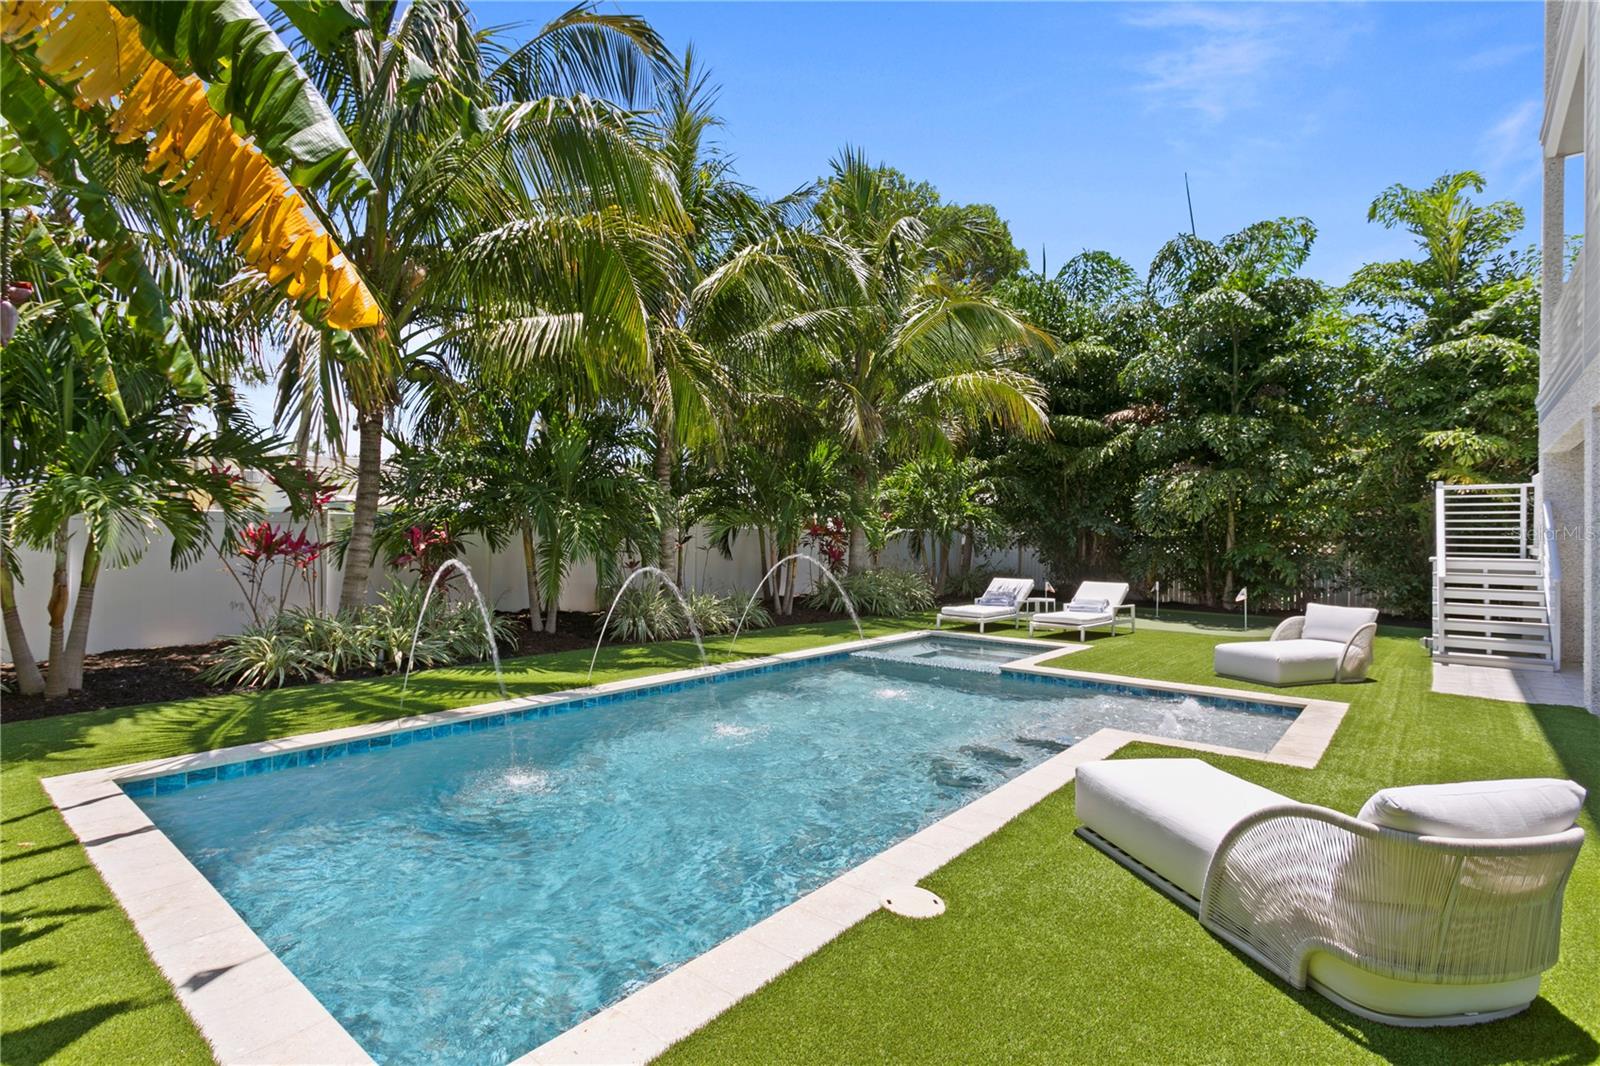 heated saltwater pool and Spa in the oversized private backyard! Features like a sun shelf, bubblers, massage jets, deck jets and multicolored lighting all controlled with your smart device